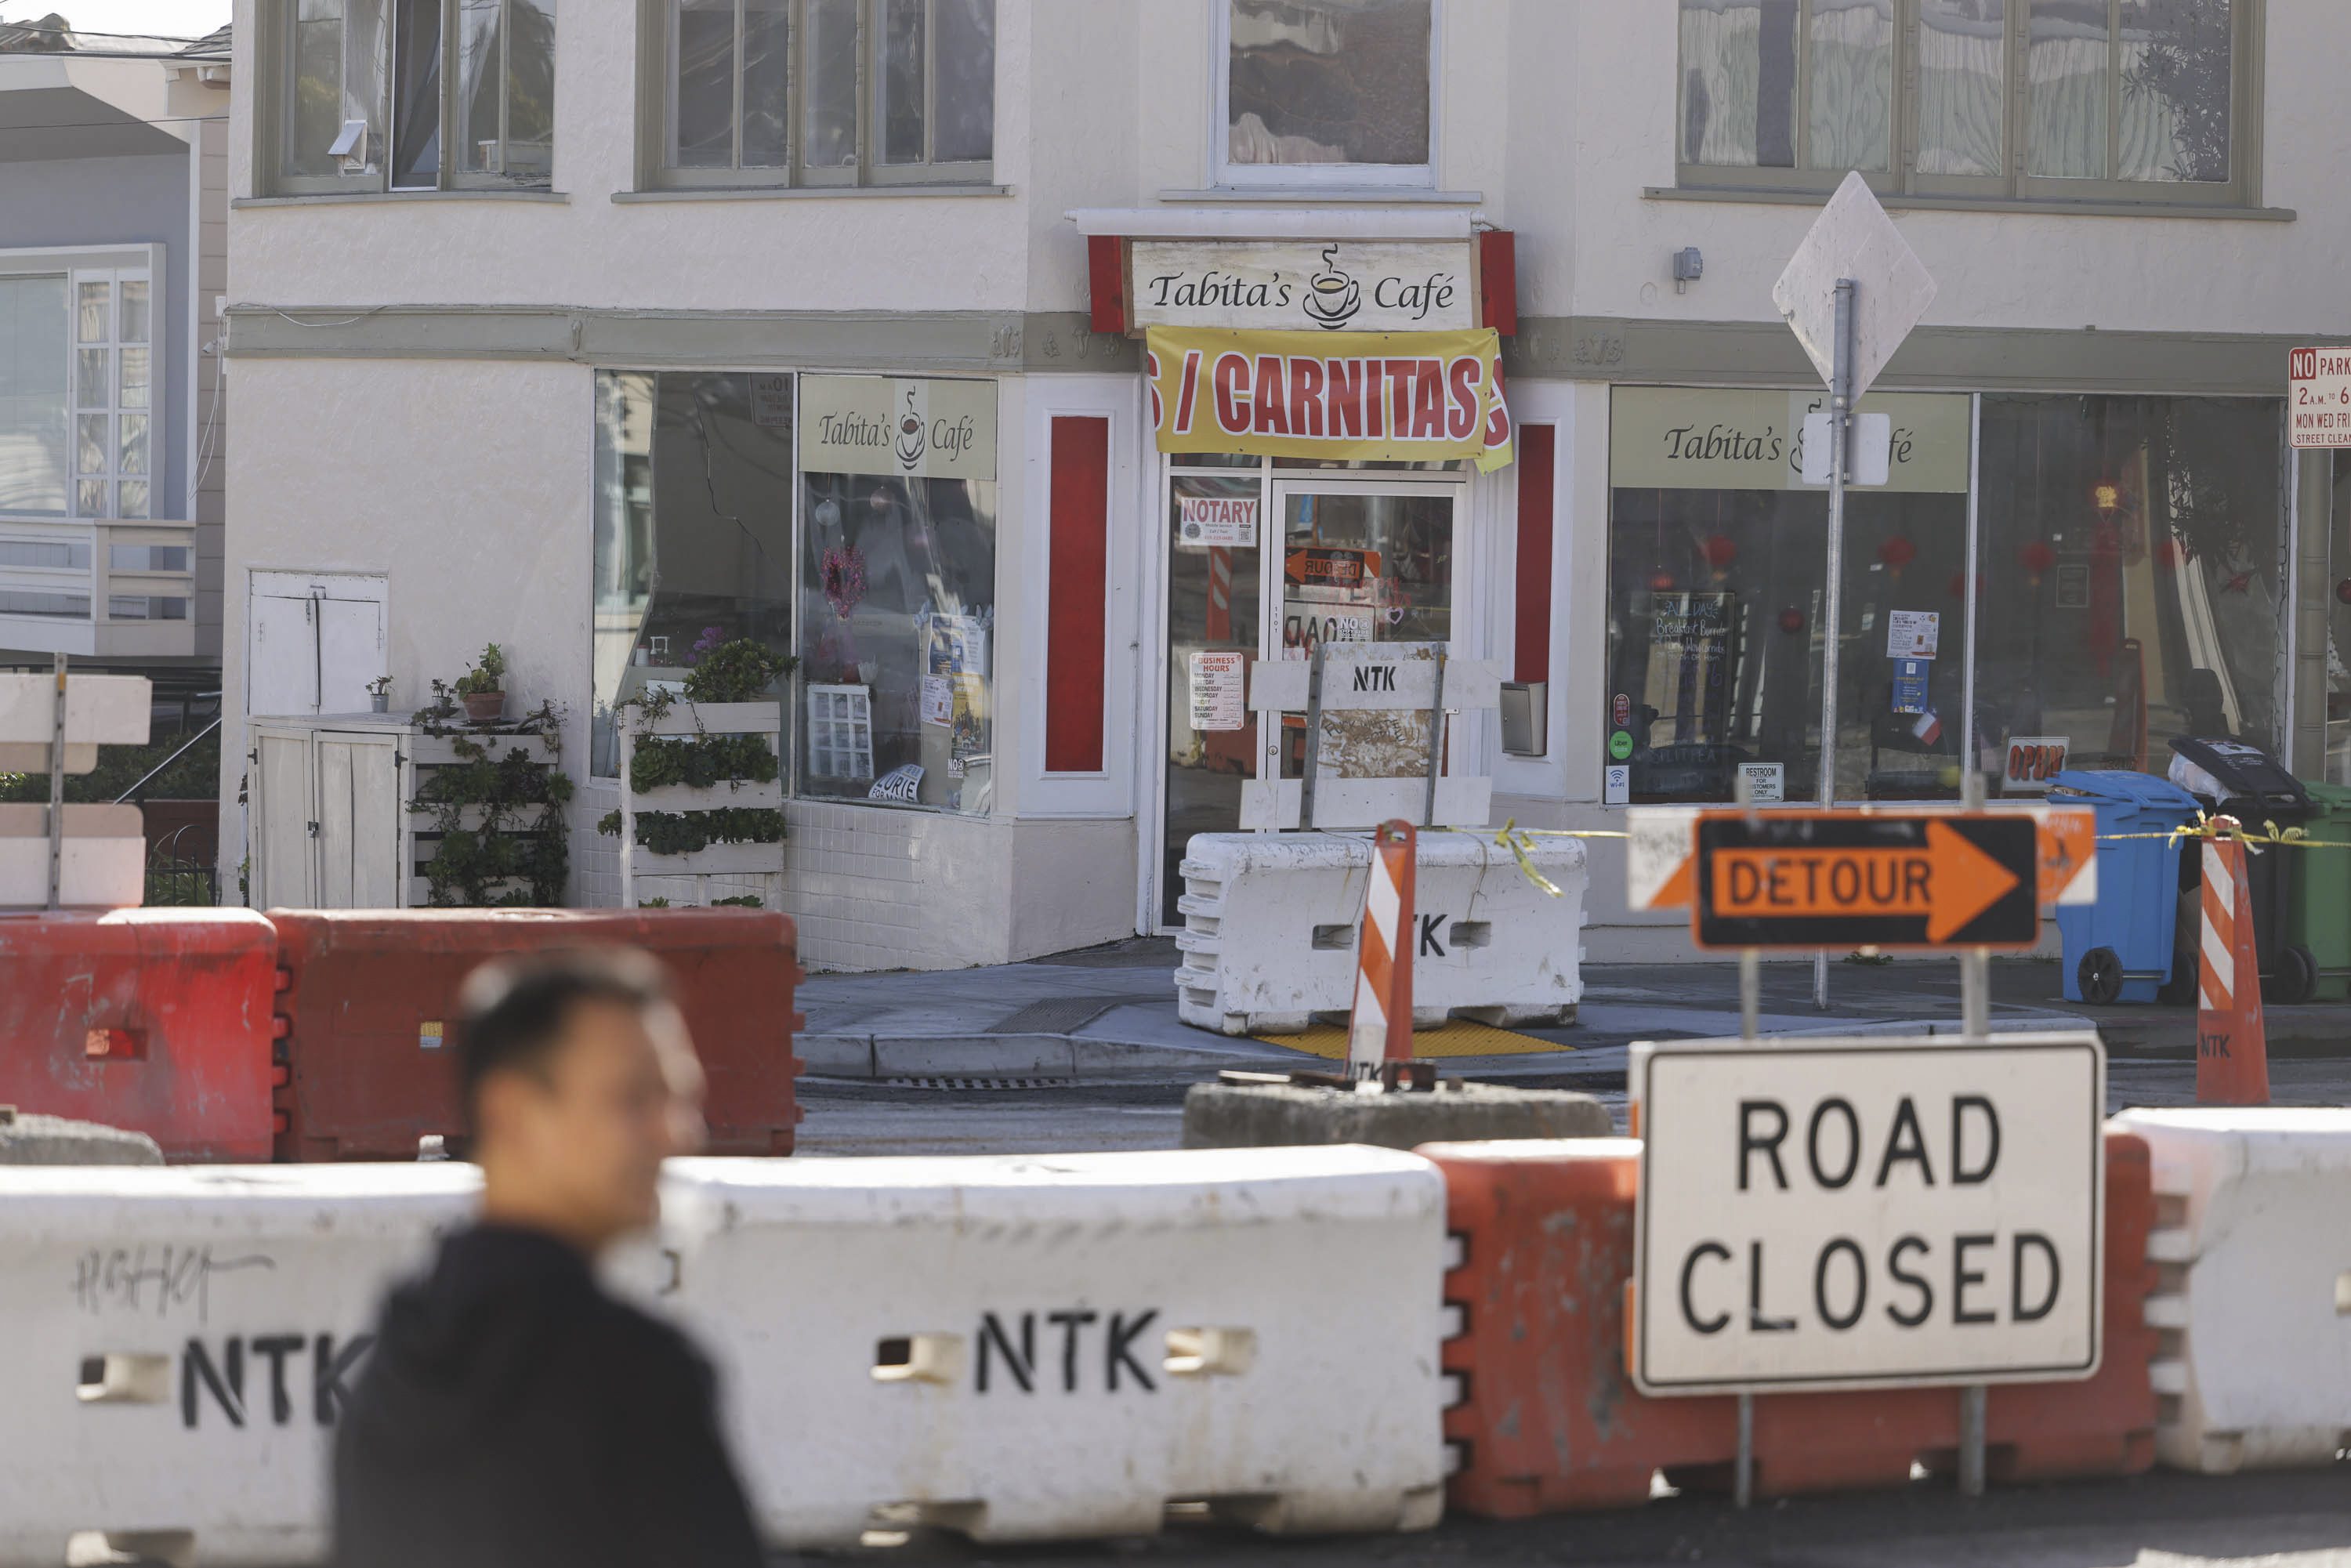 A cafe behind road barriers with &quot;ROAD CLOSED&quot; and &quot;DETOUR&quot; signs, with a blurred person in the foreground.